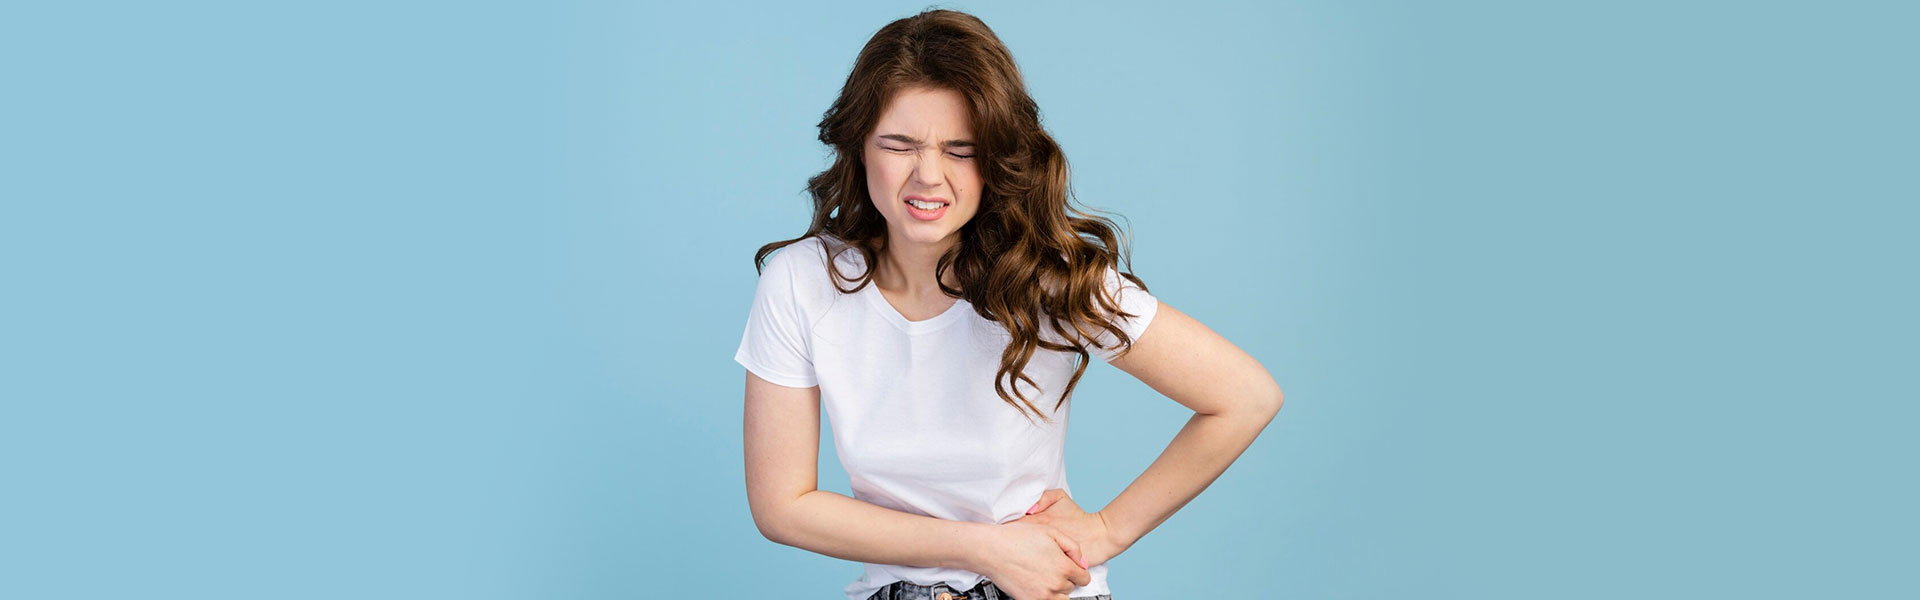 Sharp Pains in Your Belly? Your Appendix Could Be Inflamed!